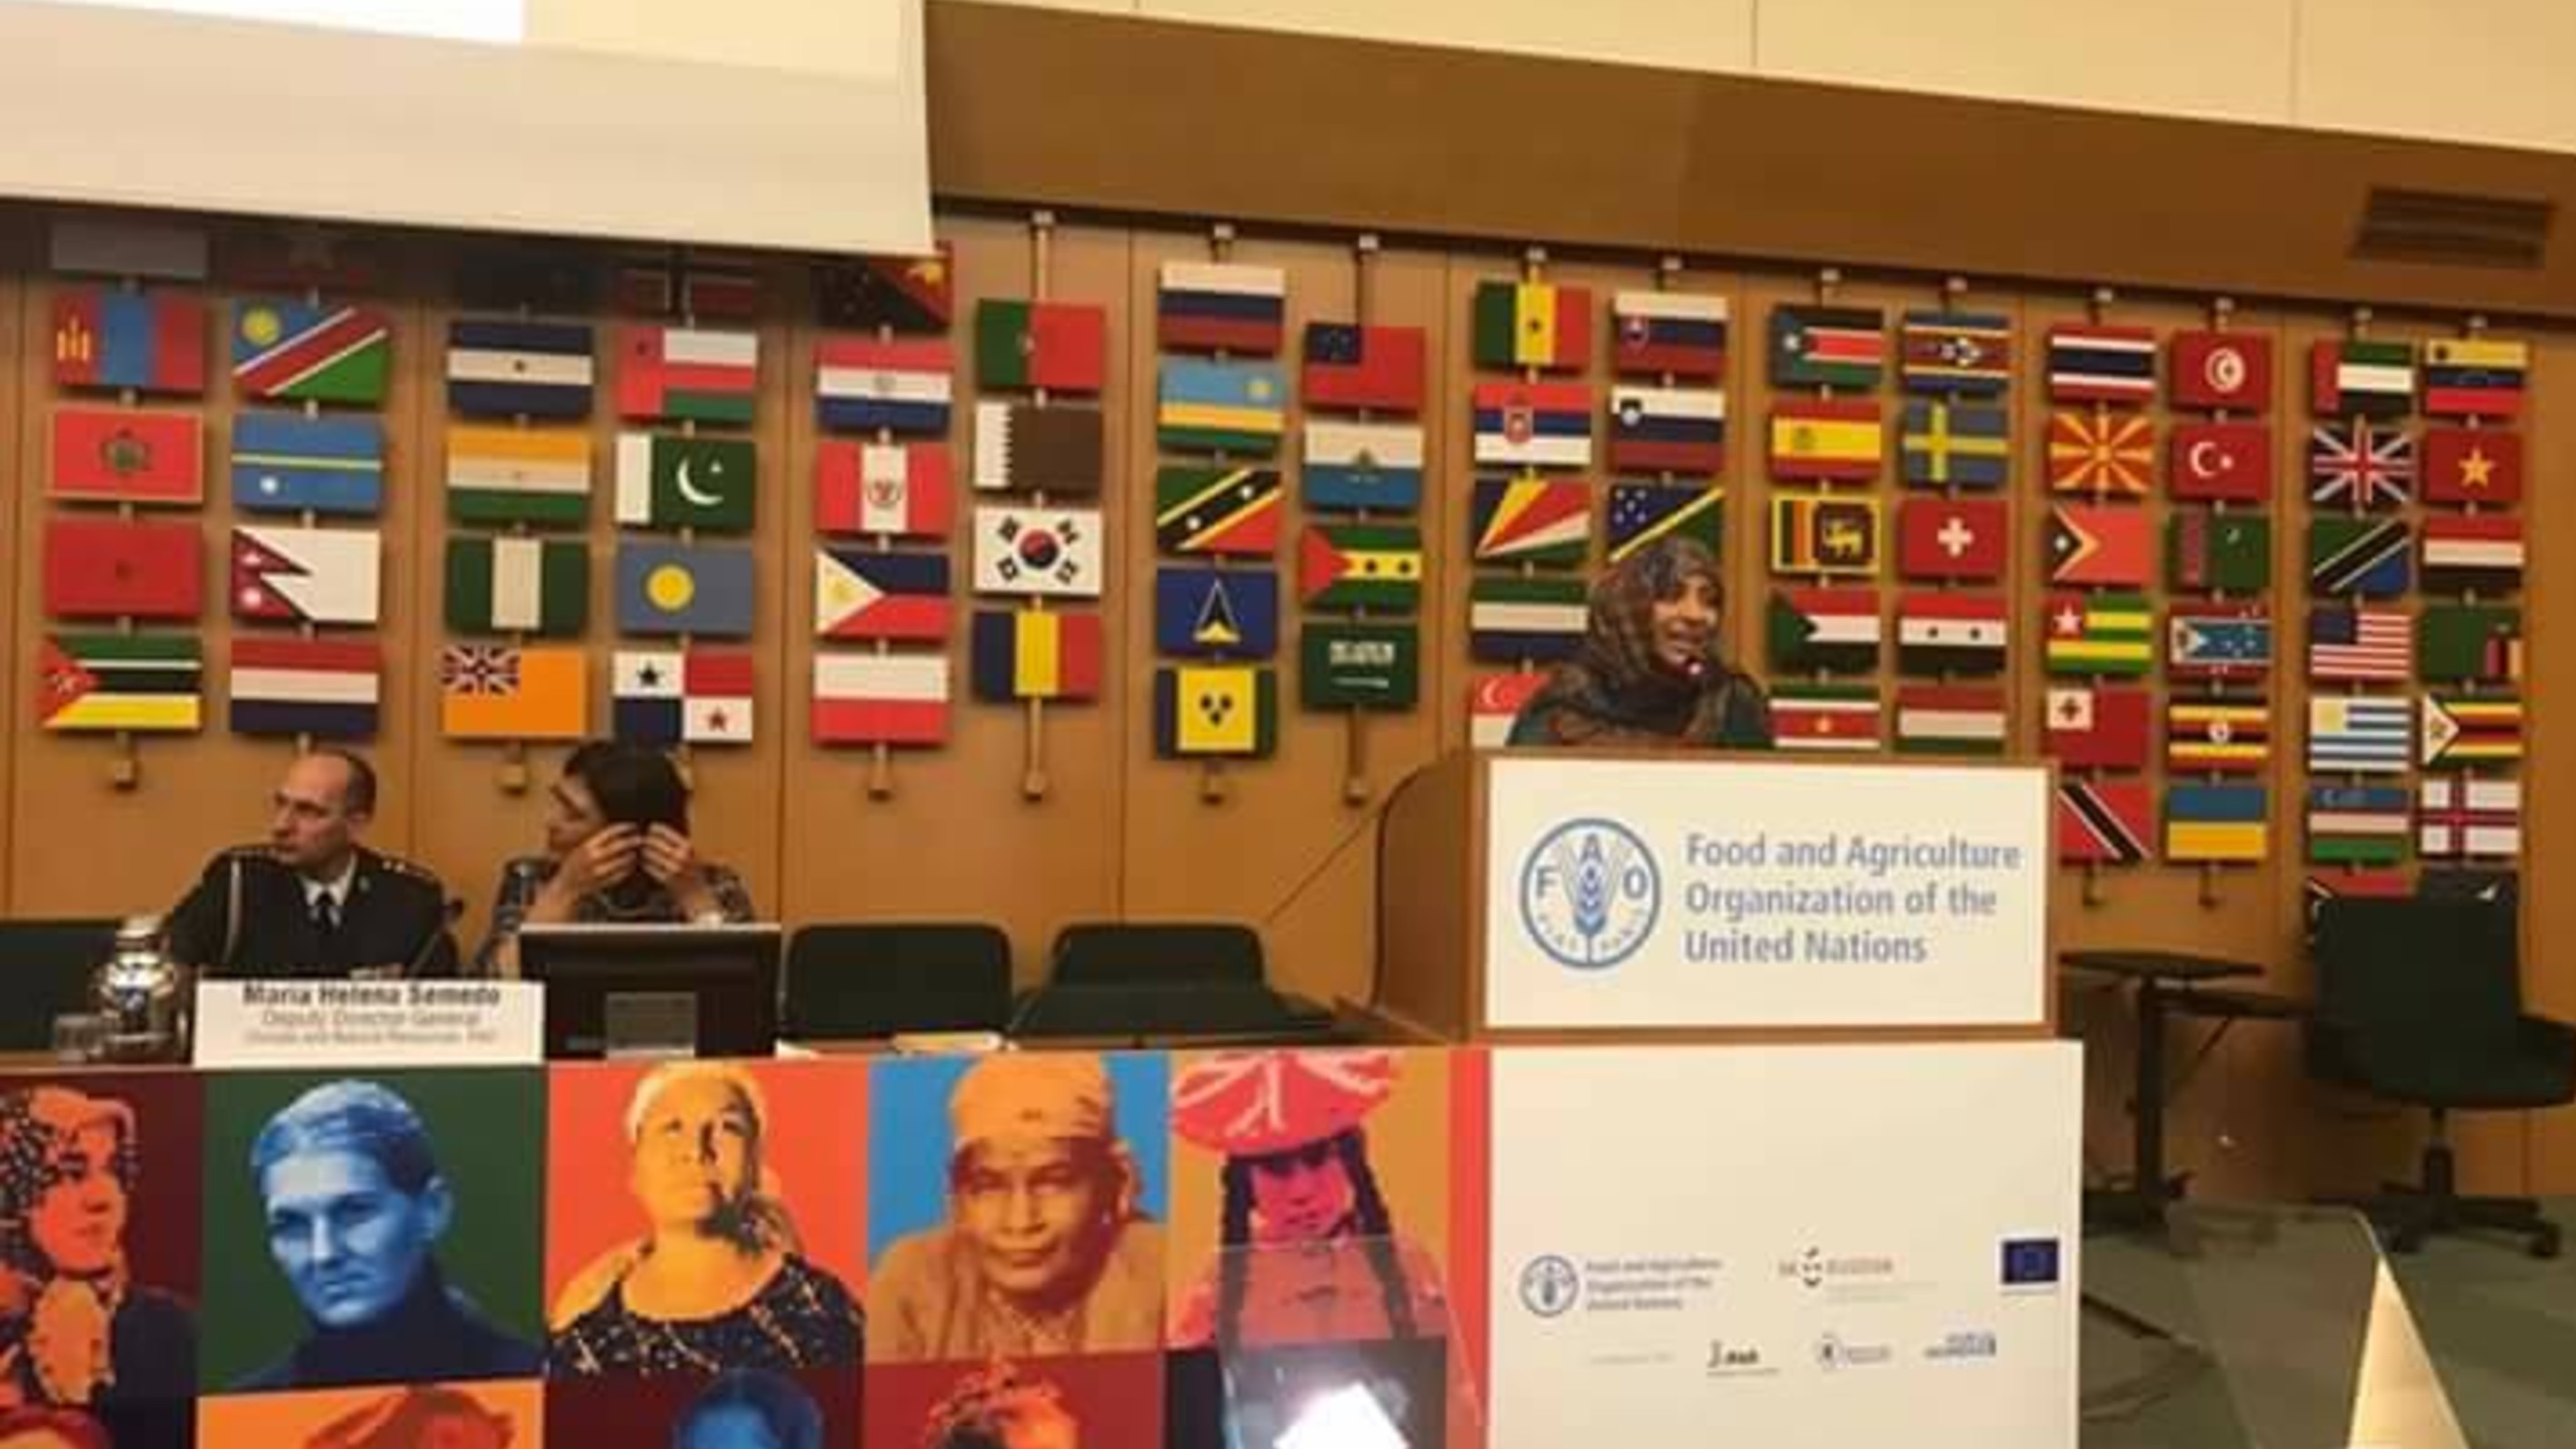  Mrs. Tawakkol Karman’s speech at the opening session of a high-level conference on rural women’s rights held at FAO headquarters in Rome